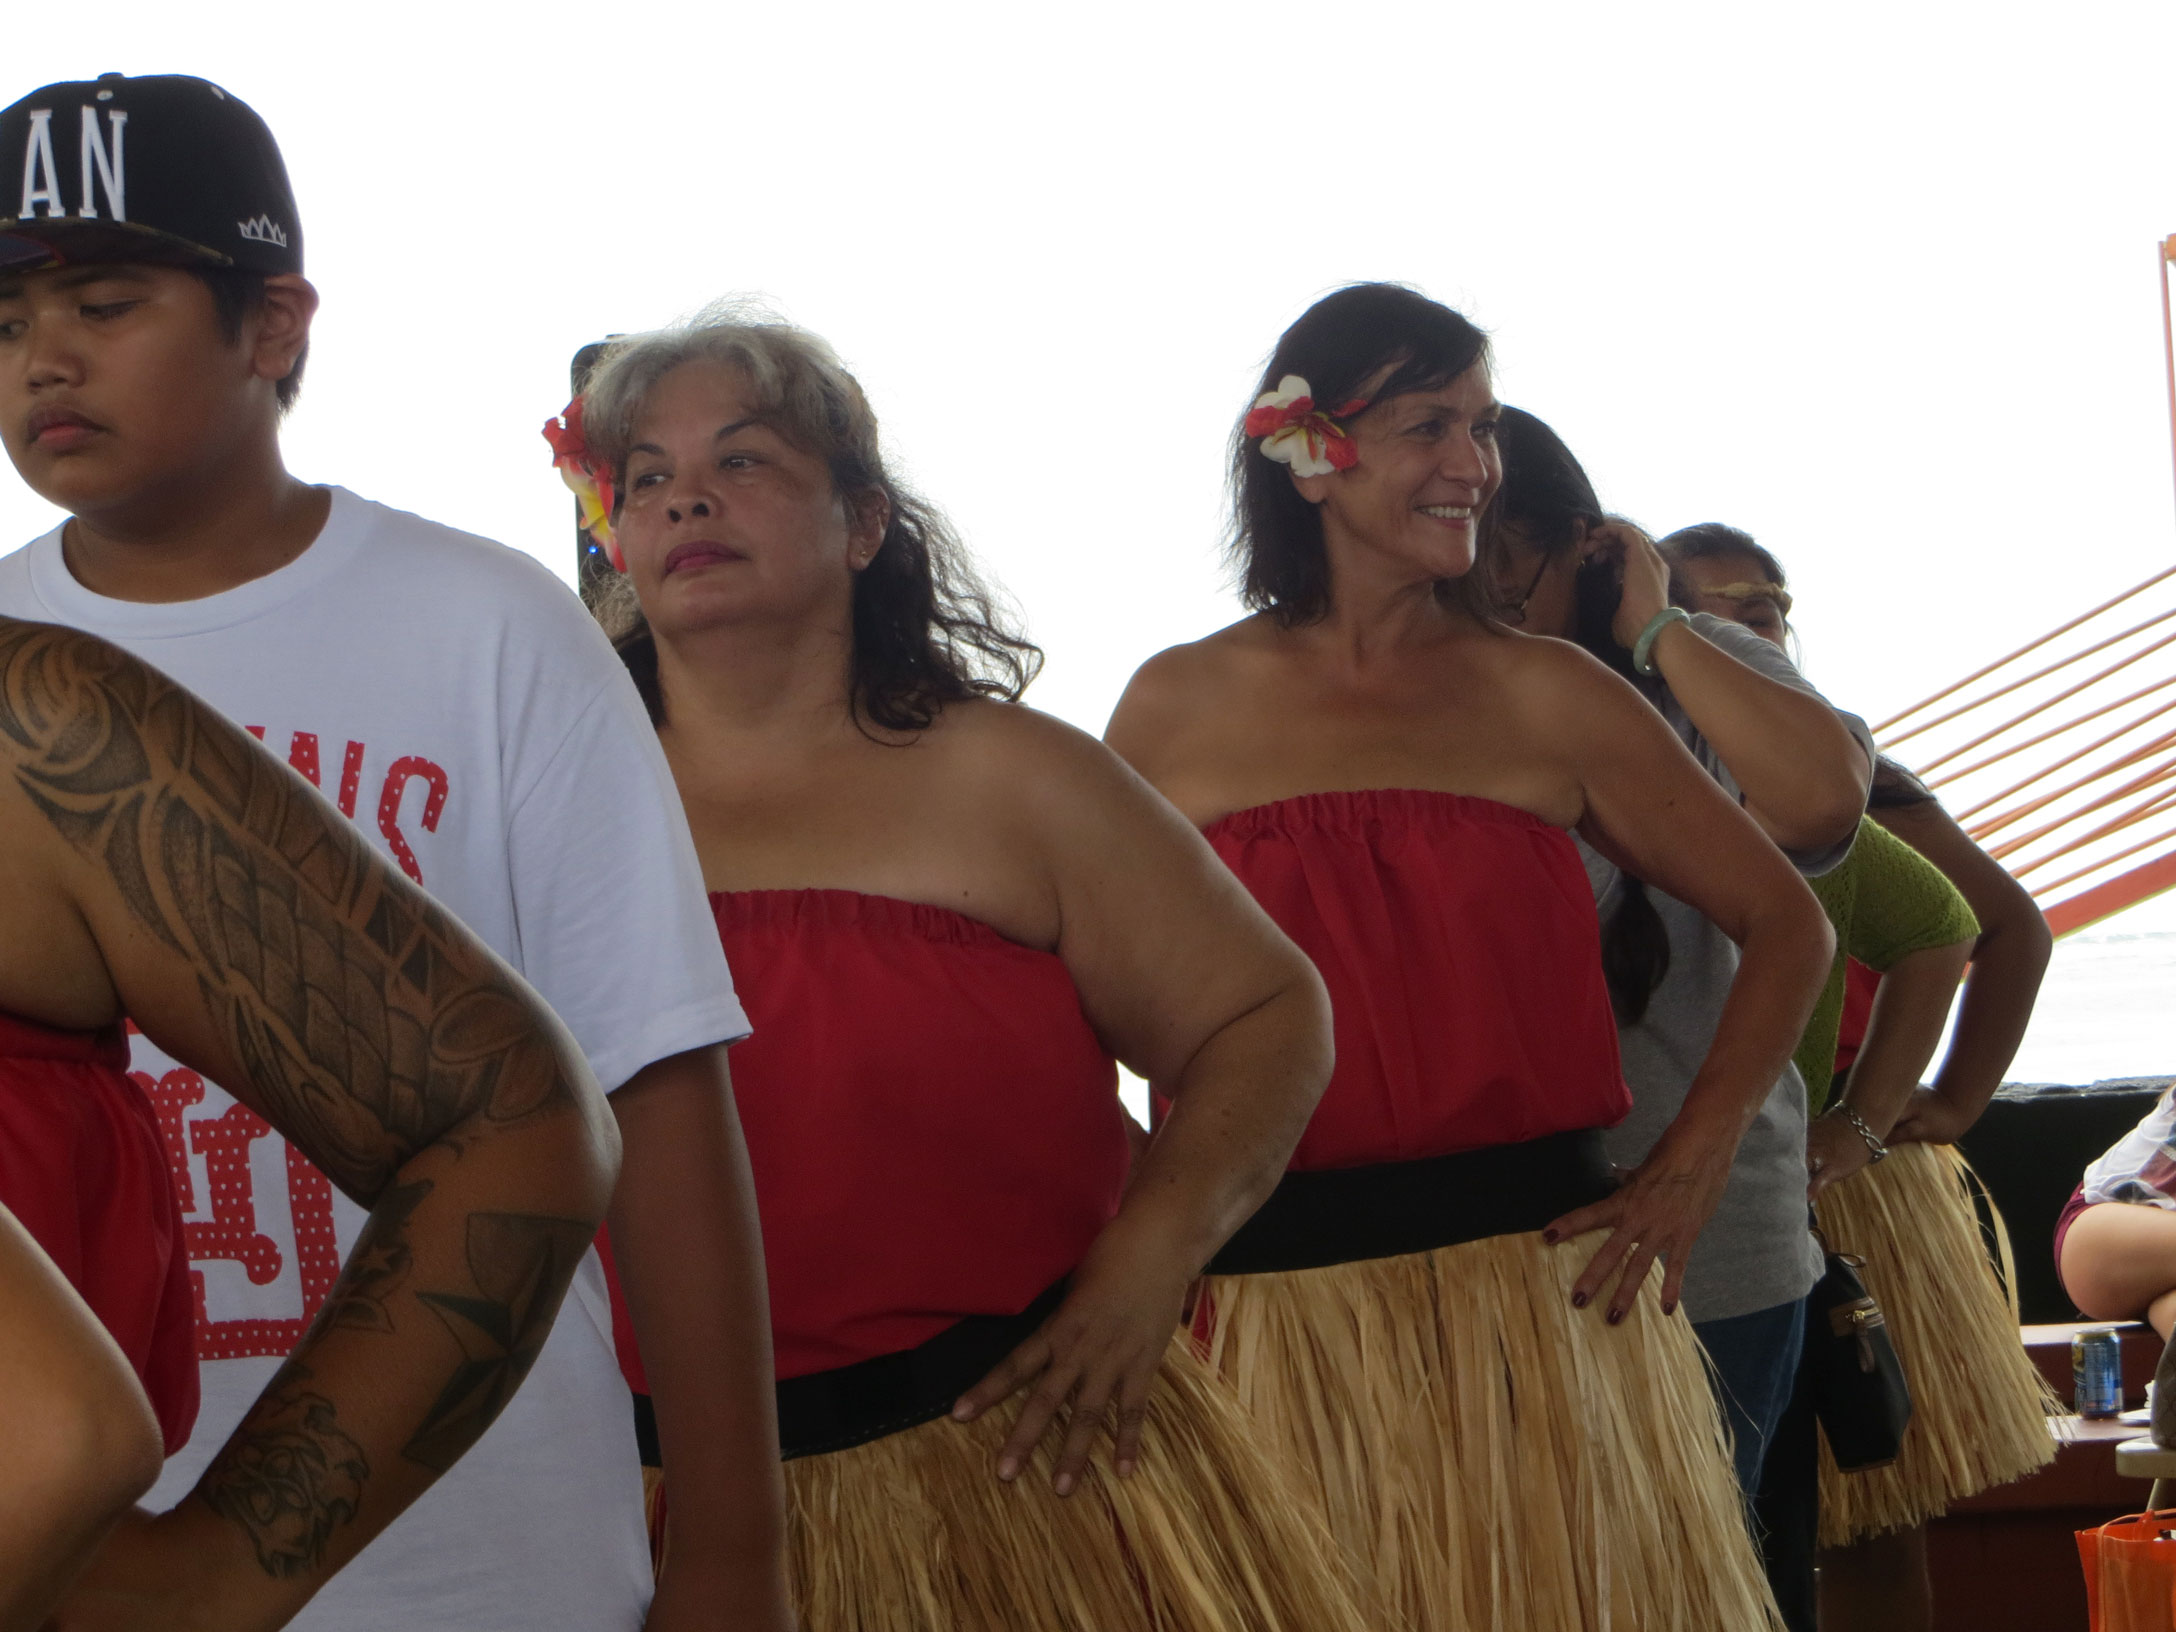 Several individuals standing in single file line wearing grass skirts, red tube tops and a flower in their right ear.